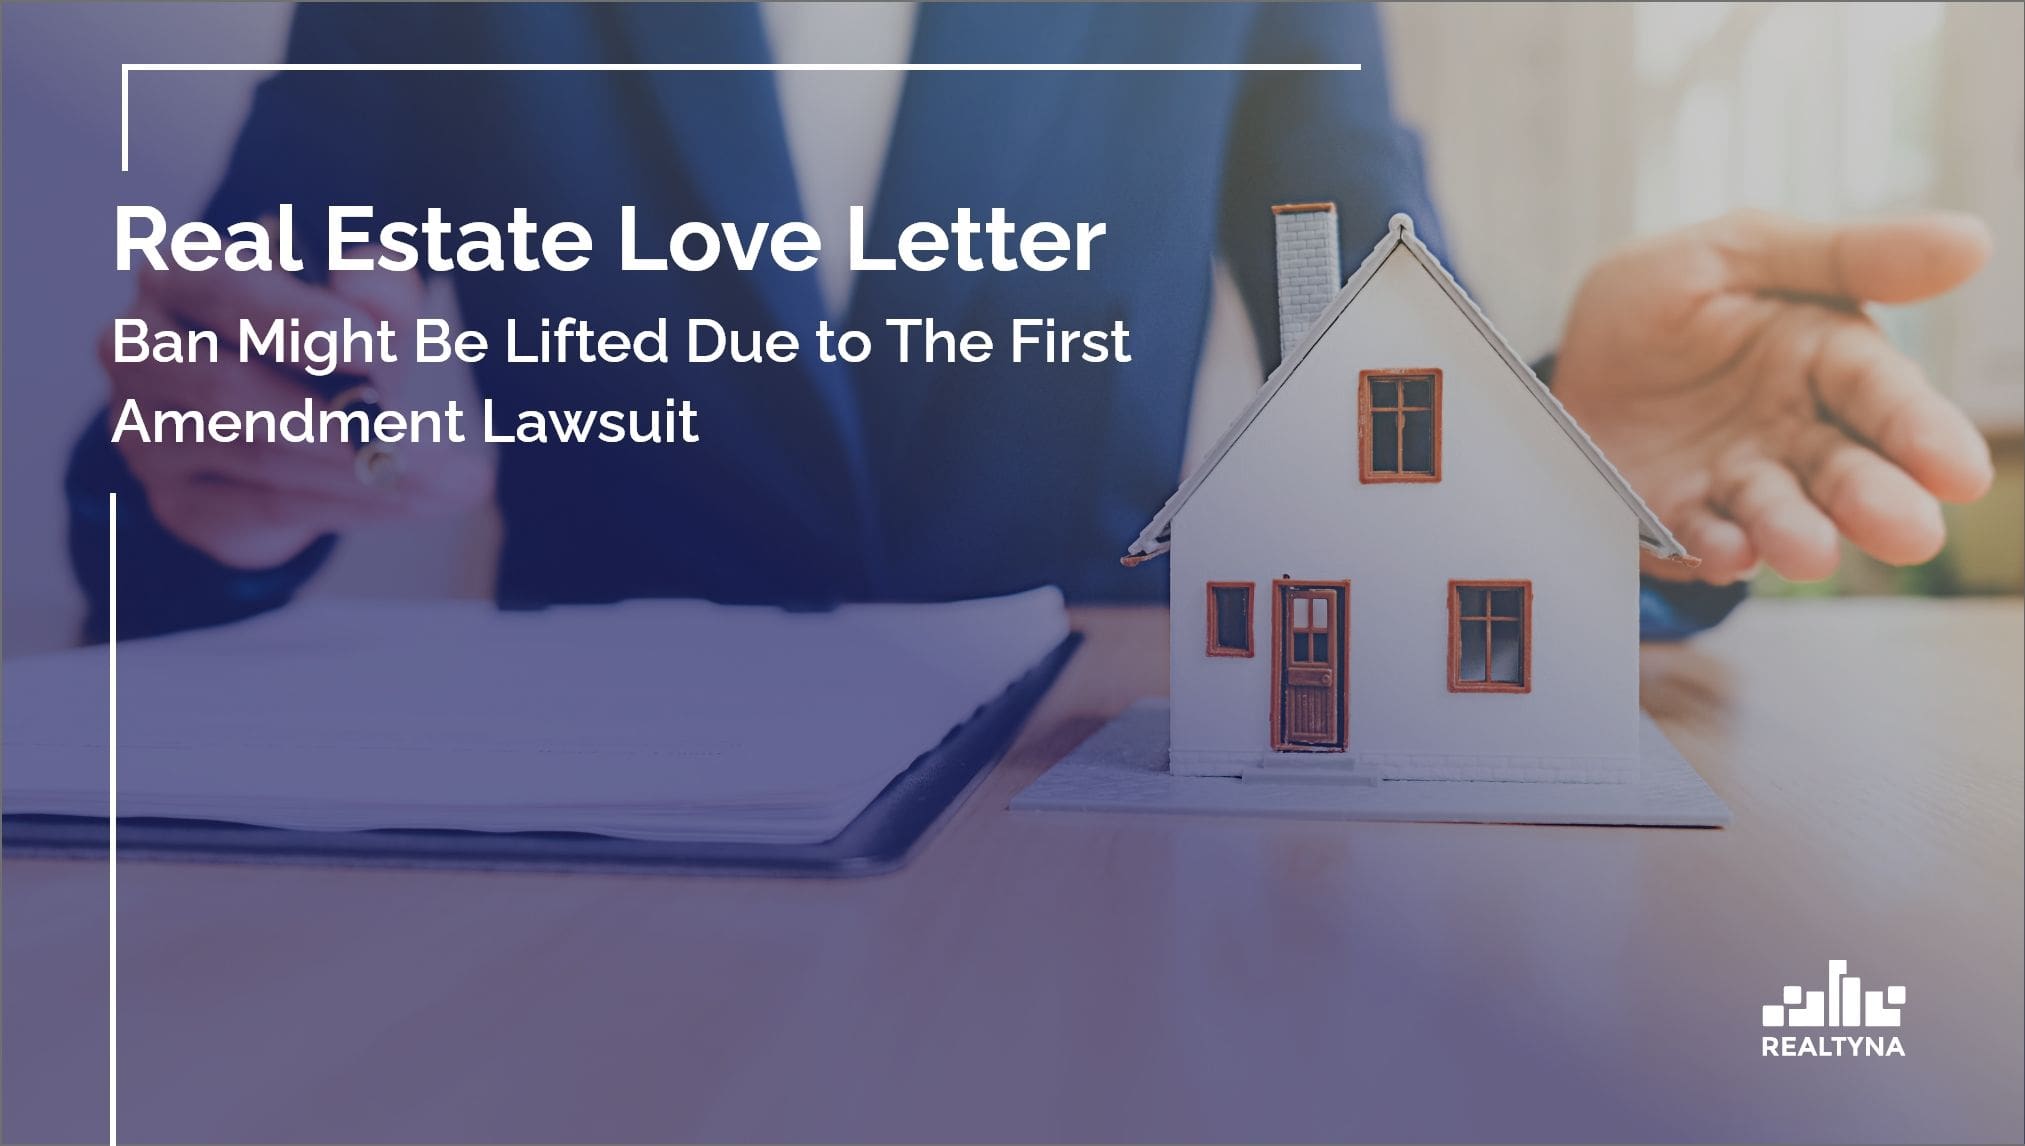 Real Estate Love Letter Ban Might Be Lifted Due to The First Amendment Lawsuit